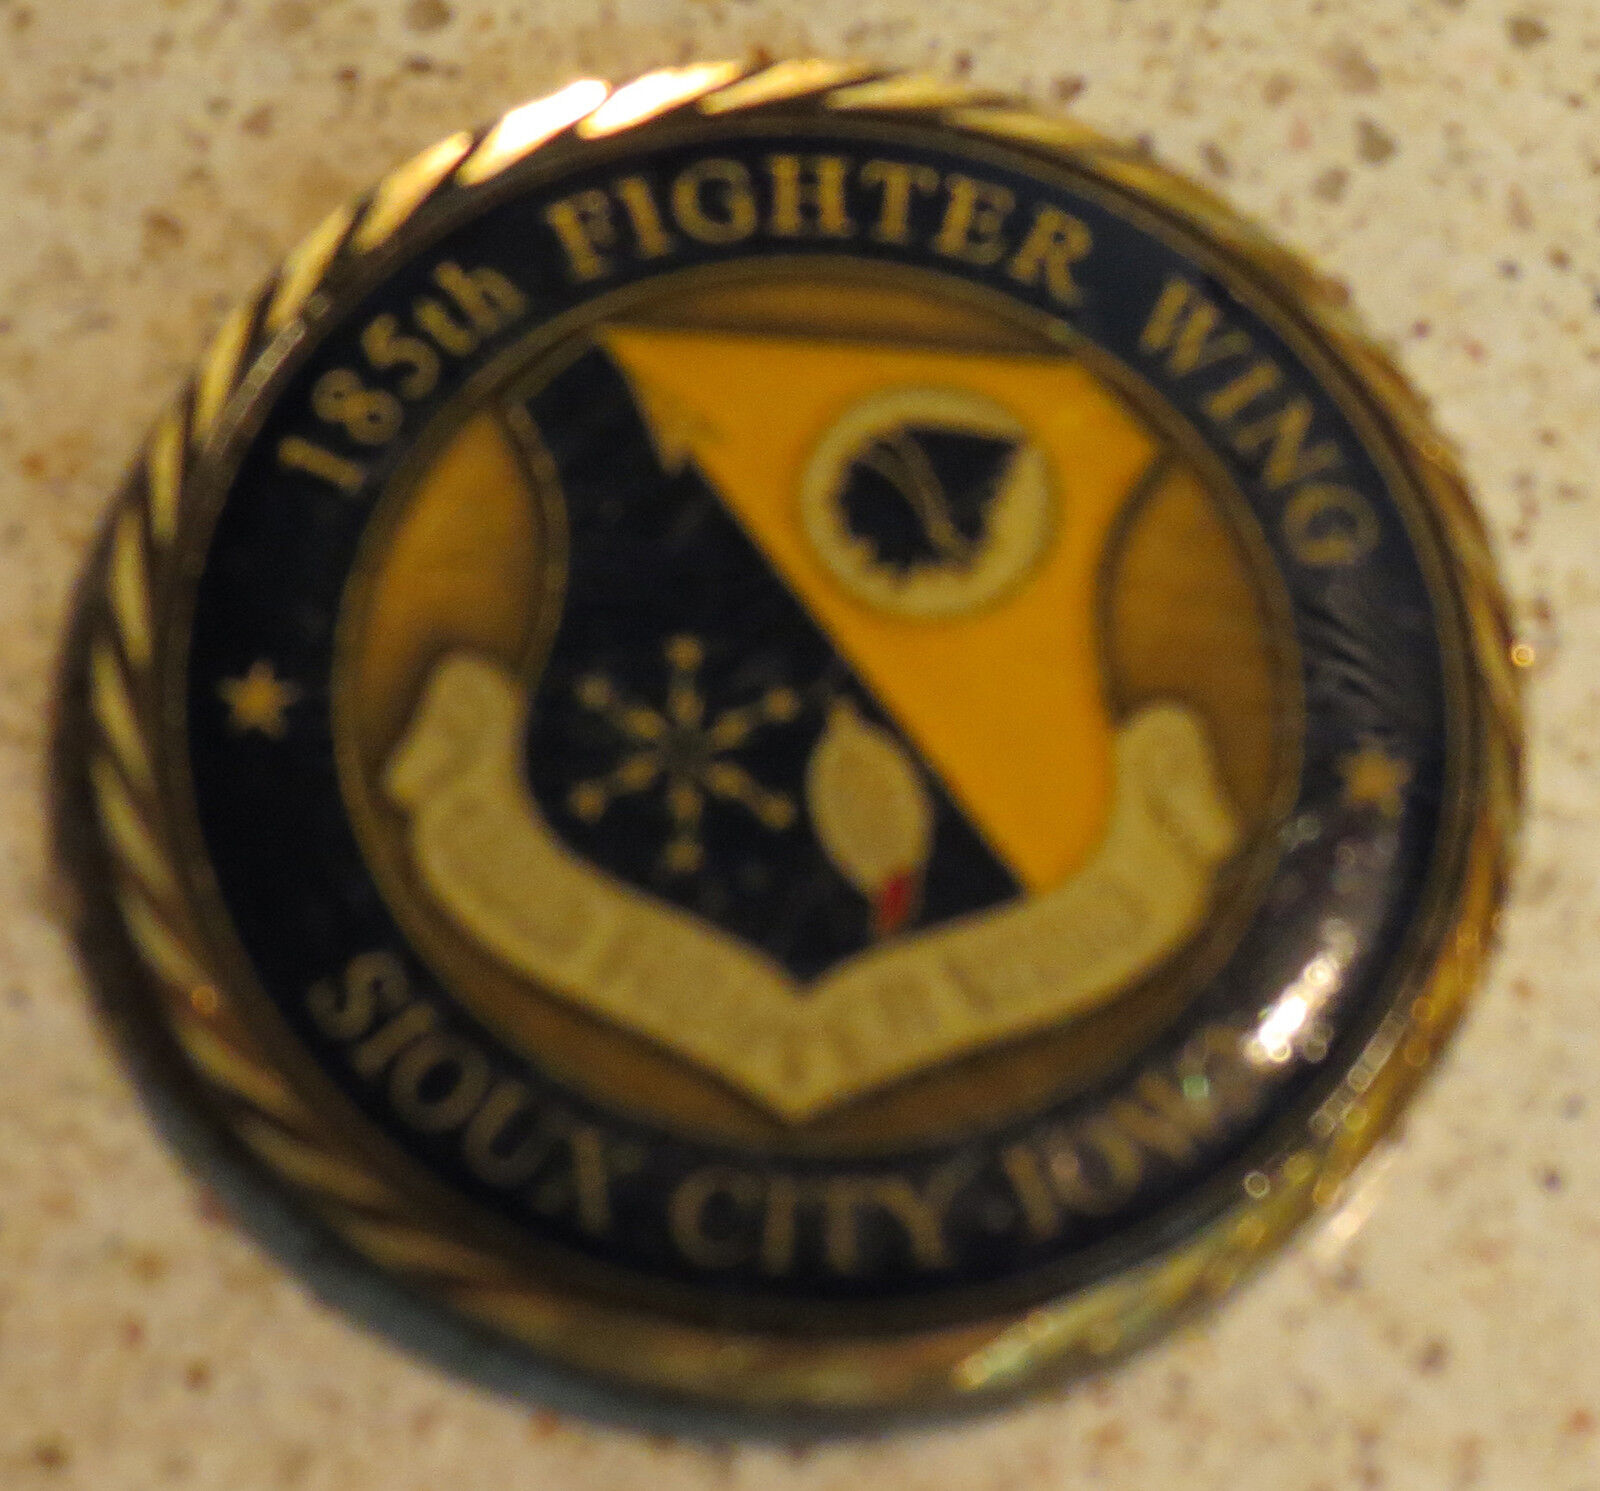 185th Fighter Wing - Sioux City Iowa - 174th FS \